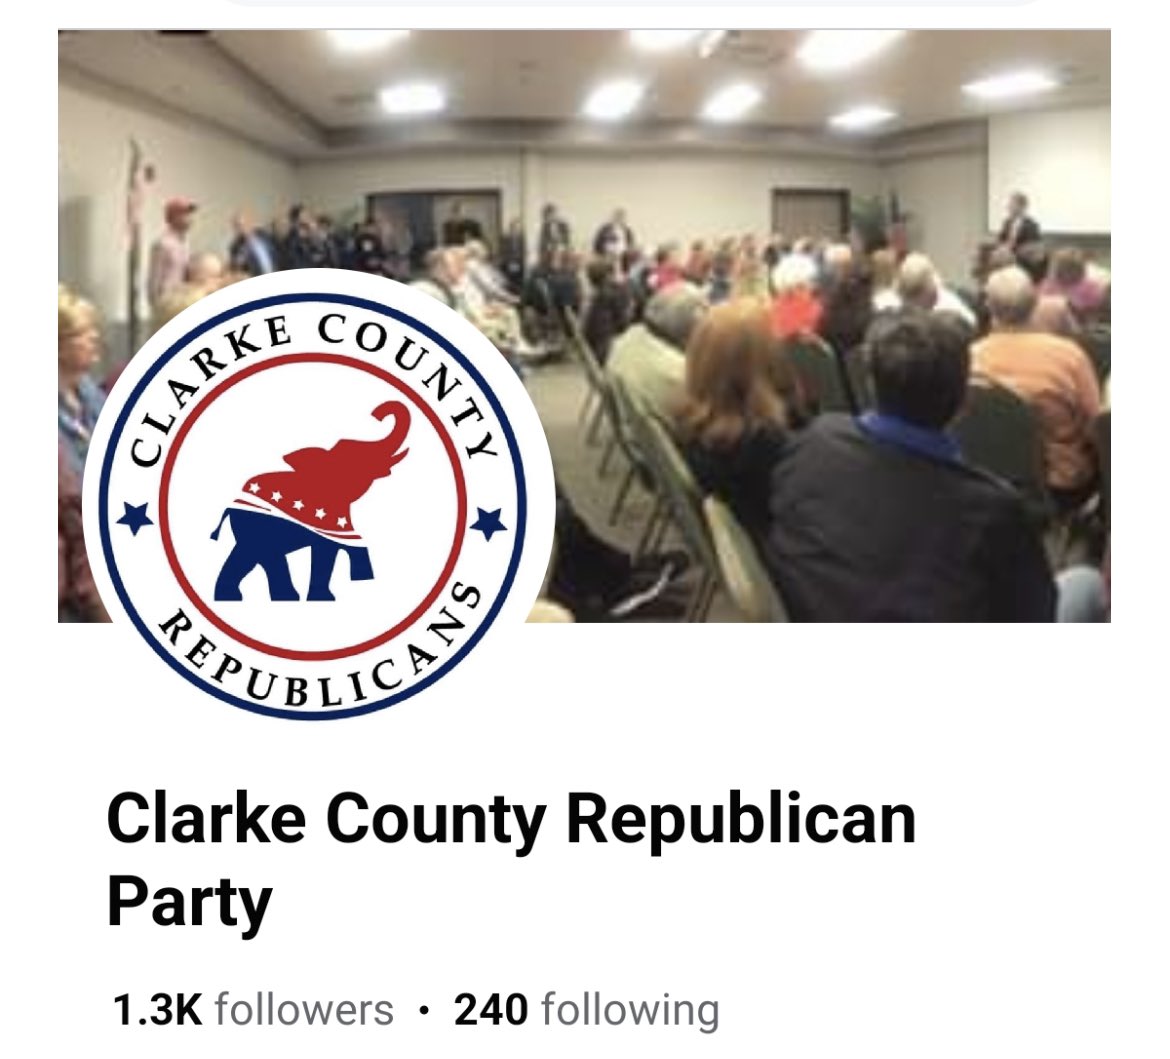 The @ChathamGaGOP voted Thursday for a new logo, and this one won. They deleted the logo from their pictures (wonder why) of the Thursday event  … could it be that the logo was taken from @AthensGA_GOP #gapol